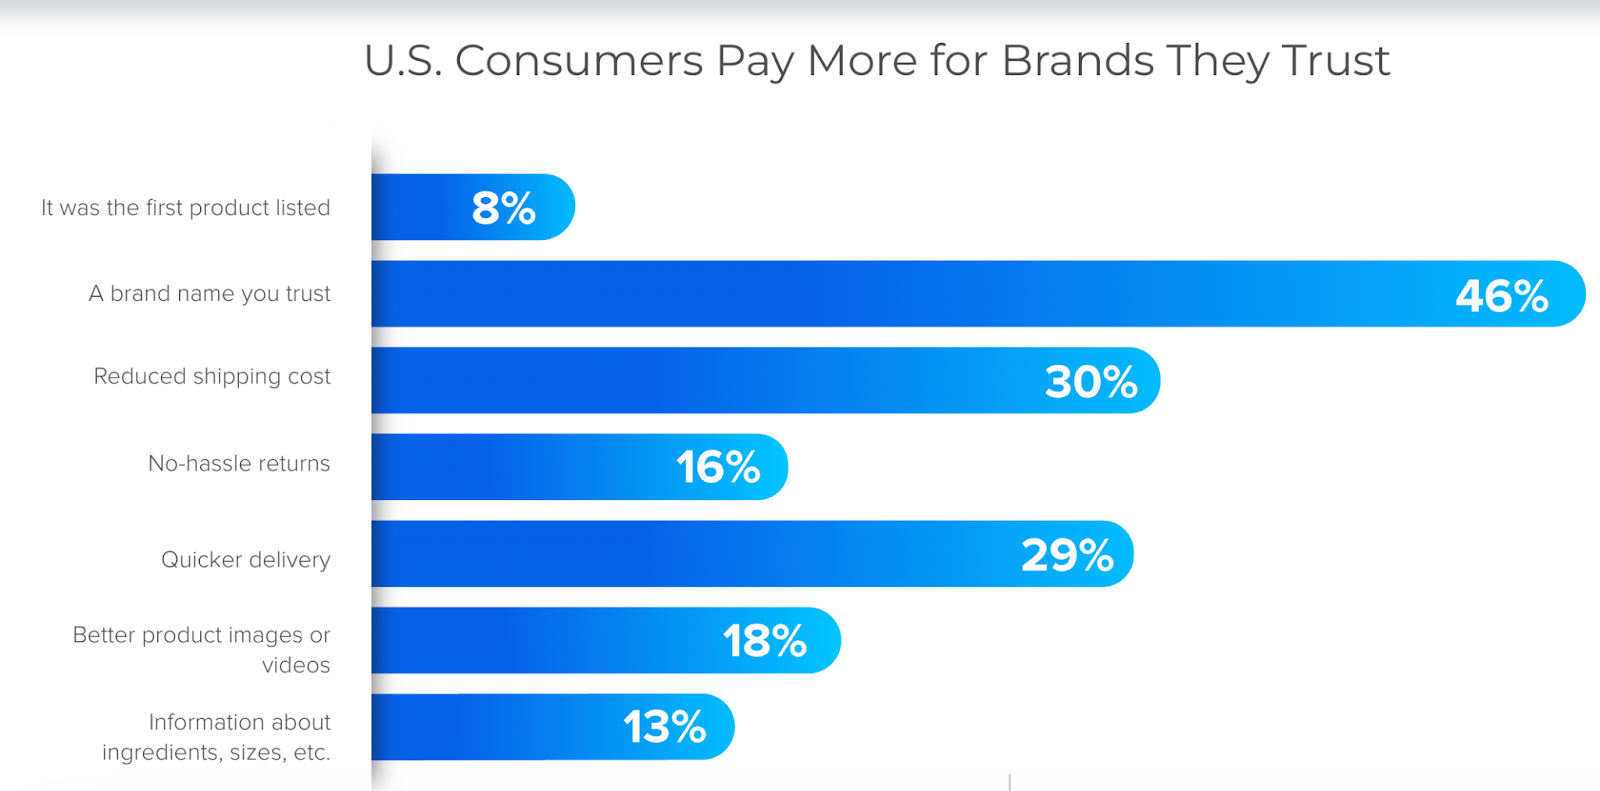 Salsify's data shows that U.S. consumers pay more for brands they trust